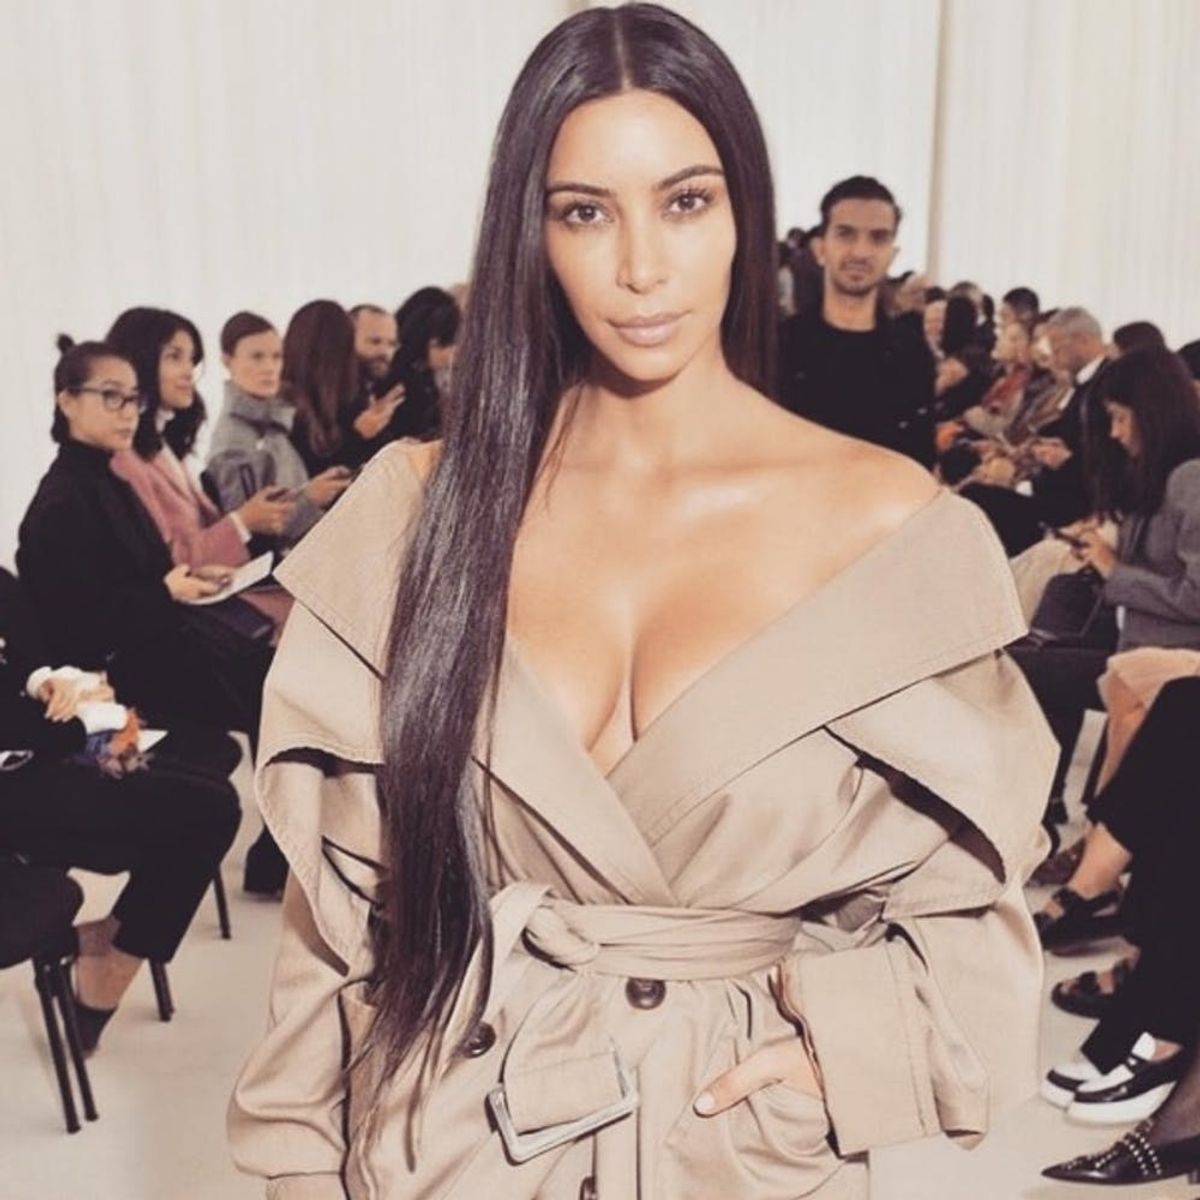 Kim K Is Reportedly Making Her First Public Appearance Since the Robbery (and the Reason Will Make You Emotional AF)